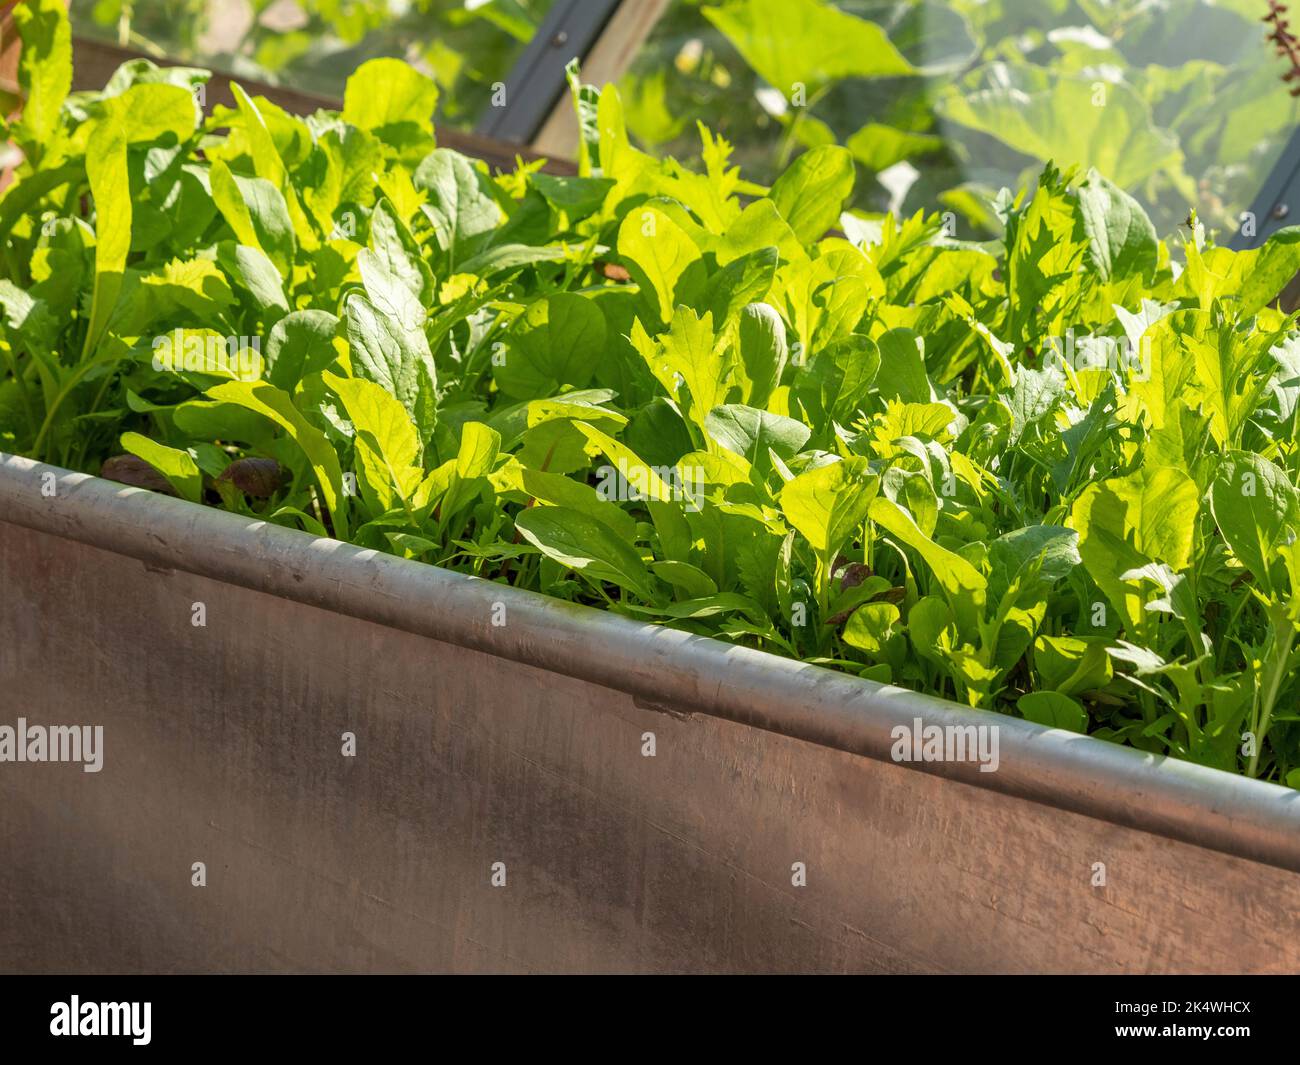 Galvanised farm trough repurposed as container to grow salad leaves in. Stock Photo